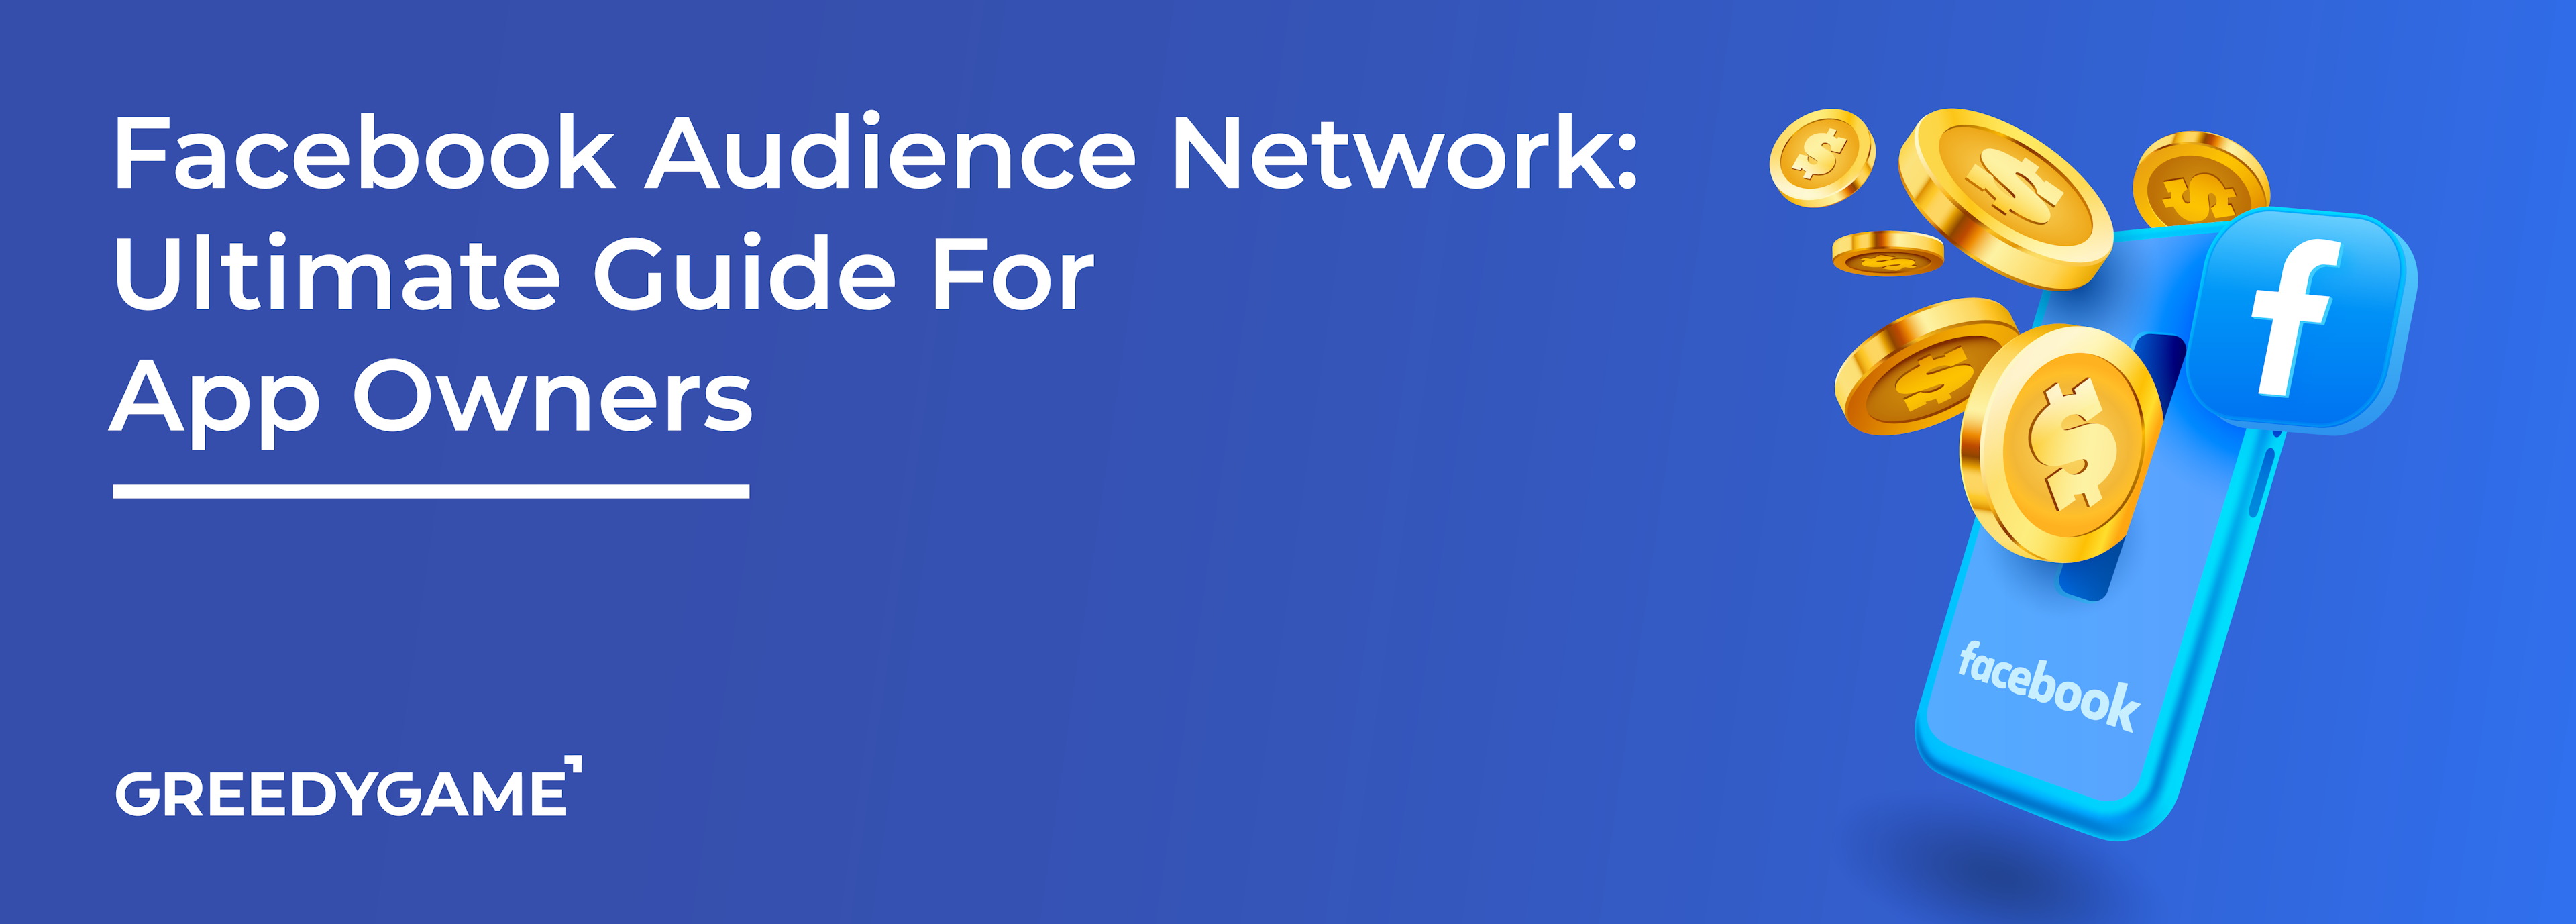 Facebook Audience Network: Ultimate Guide For App Owners